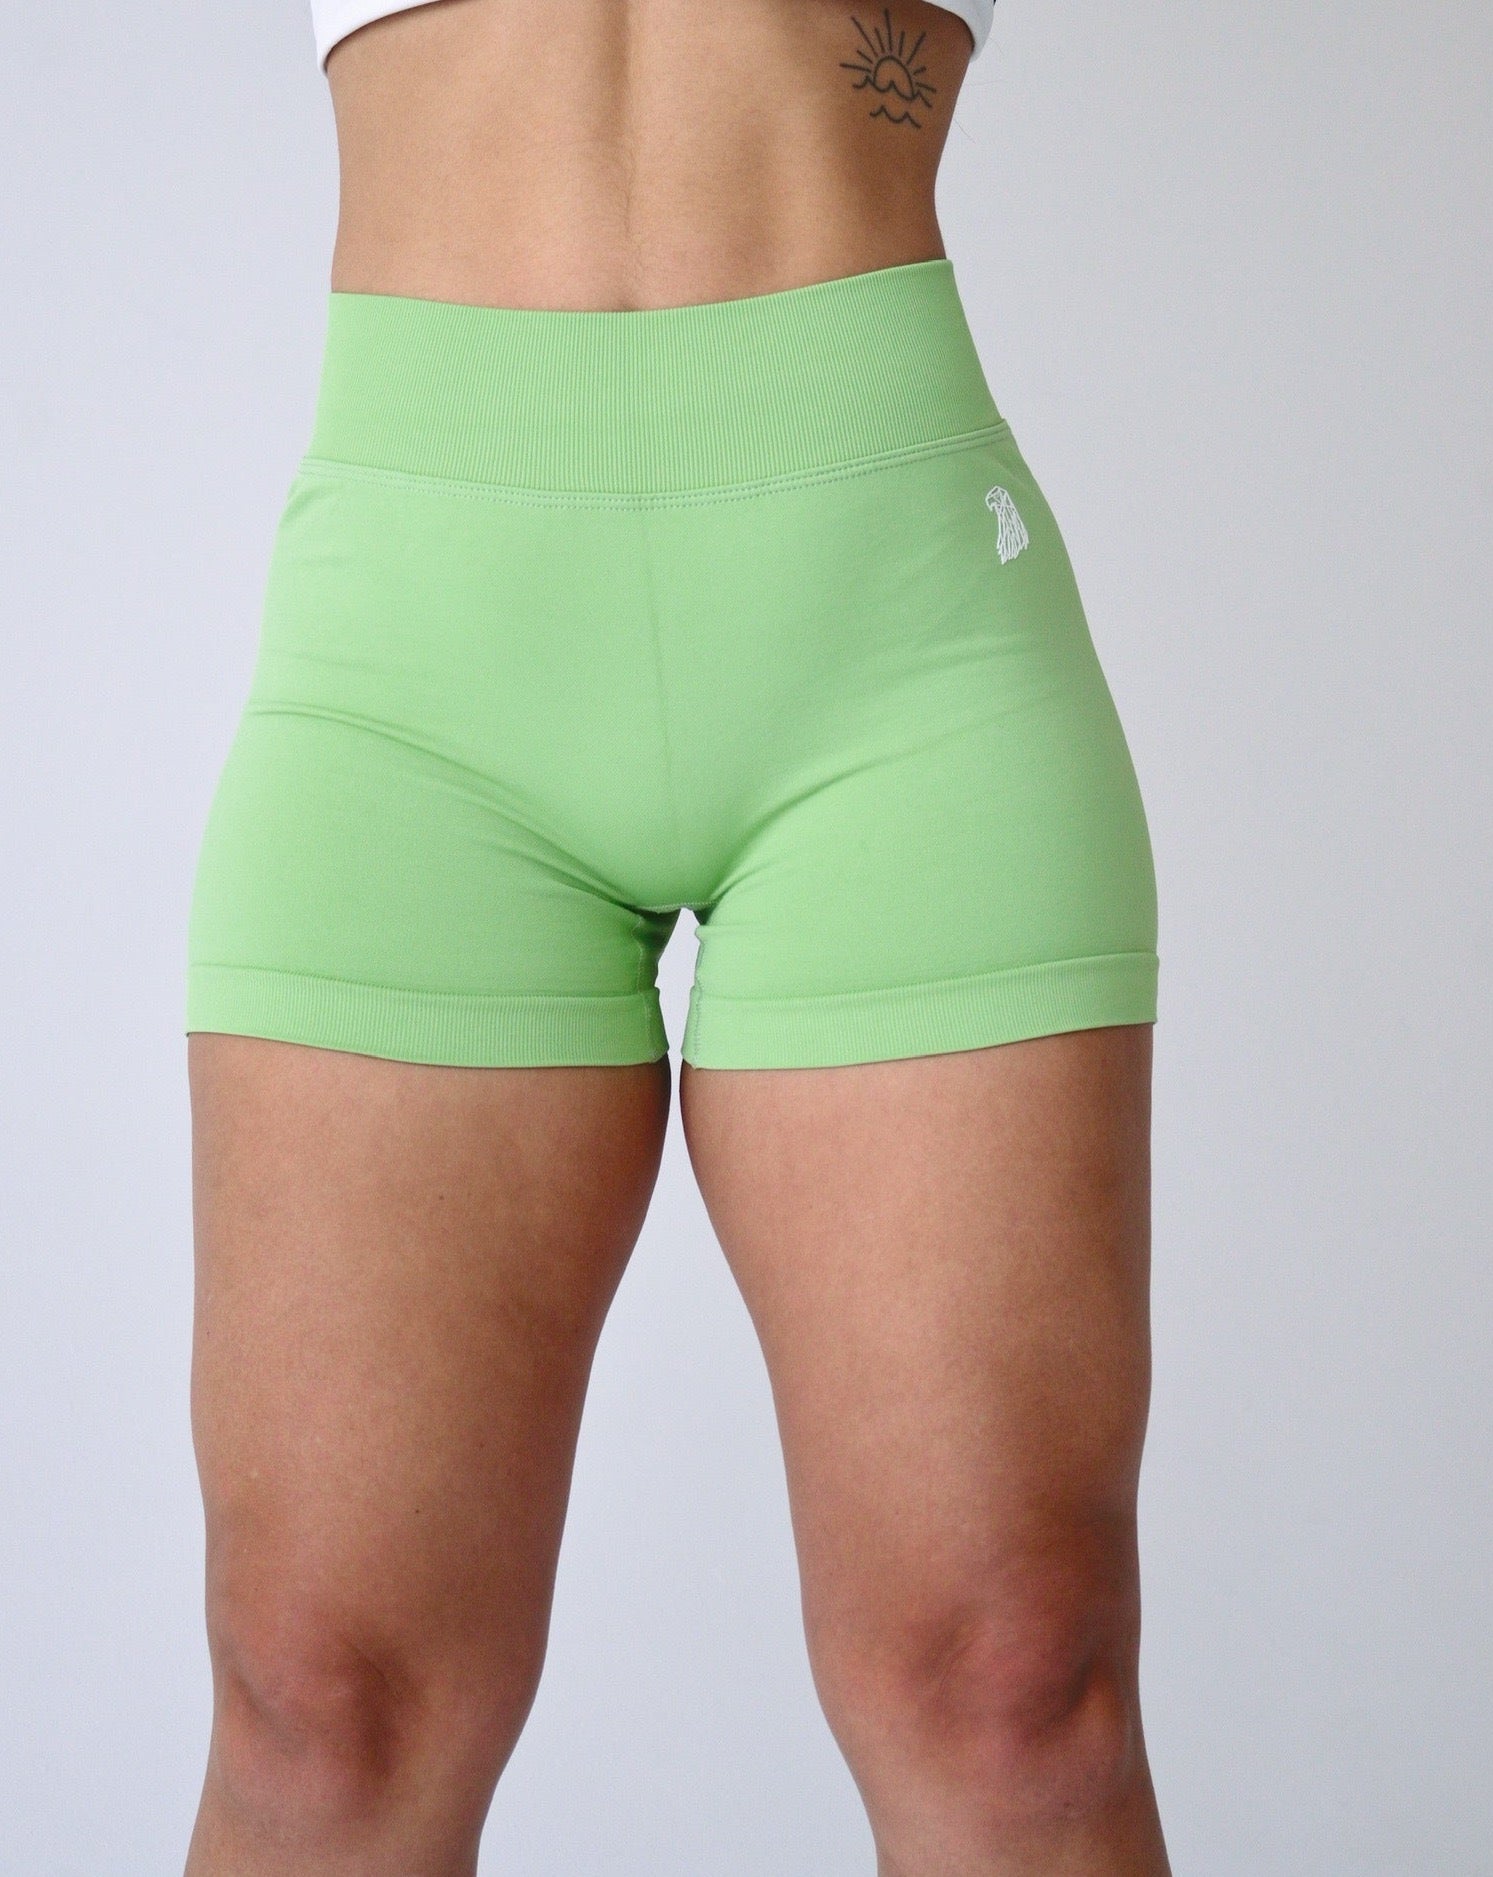 EHANCE Seamless Shorts - KIWI - Libera Fitness Apparel. Flattering v-cut waistband and 3-inch inseam for optimal comfort and flexibility during workouts. Ideal for enhancing curves.